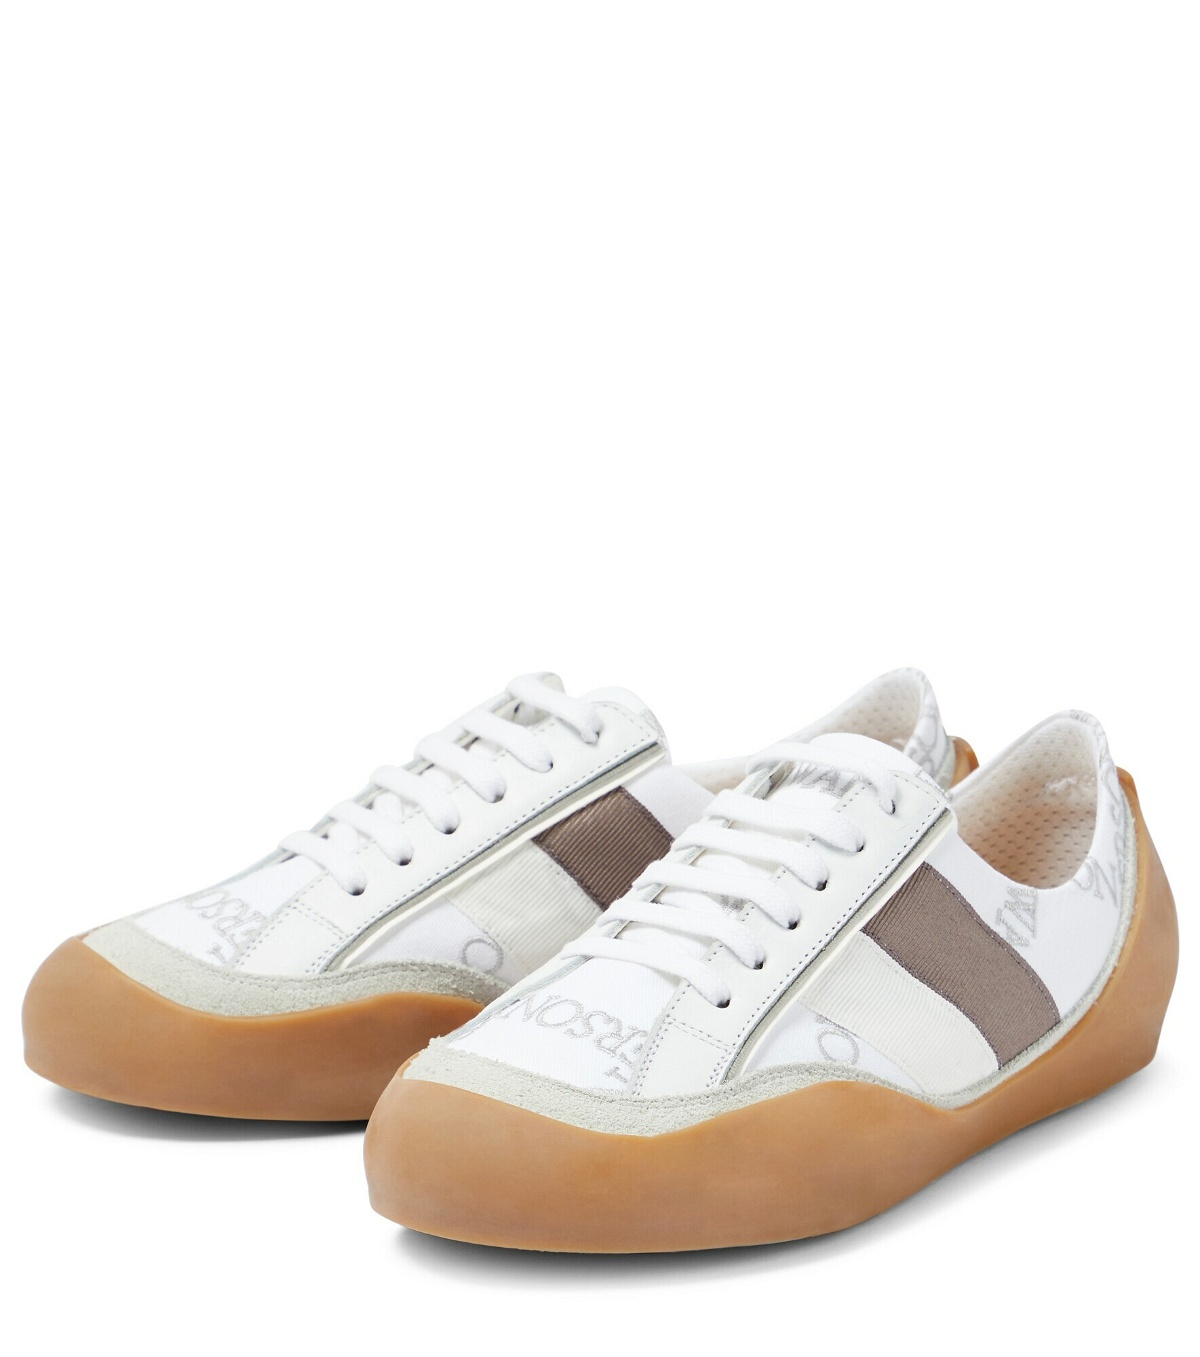 JW Anderson - Bubble embroidered canvas sneakers JW Anderson